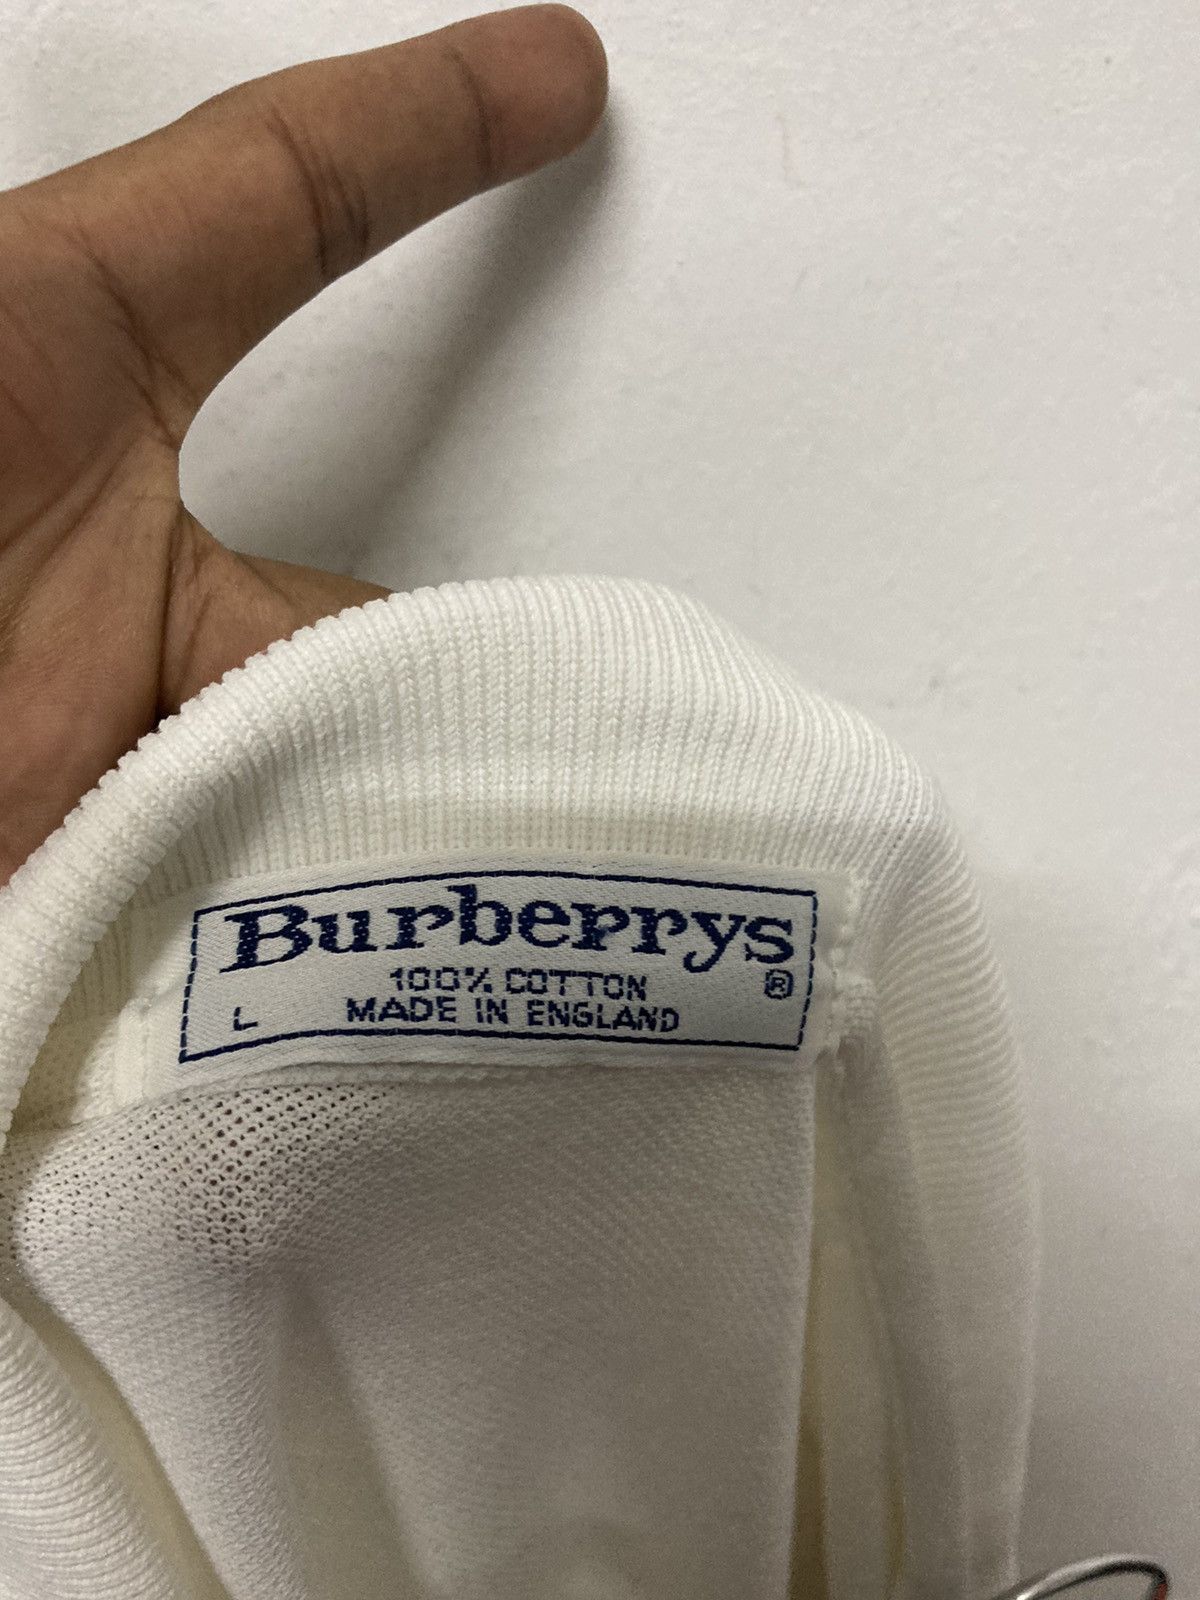 Vintage Burberrys Polo Shirt Made in England - 11